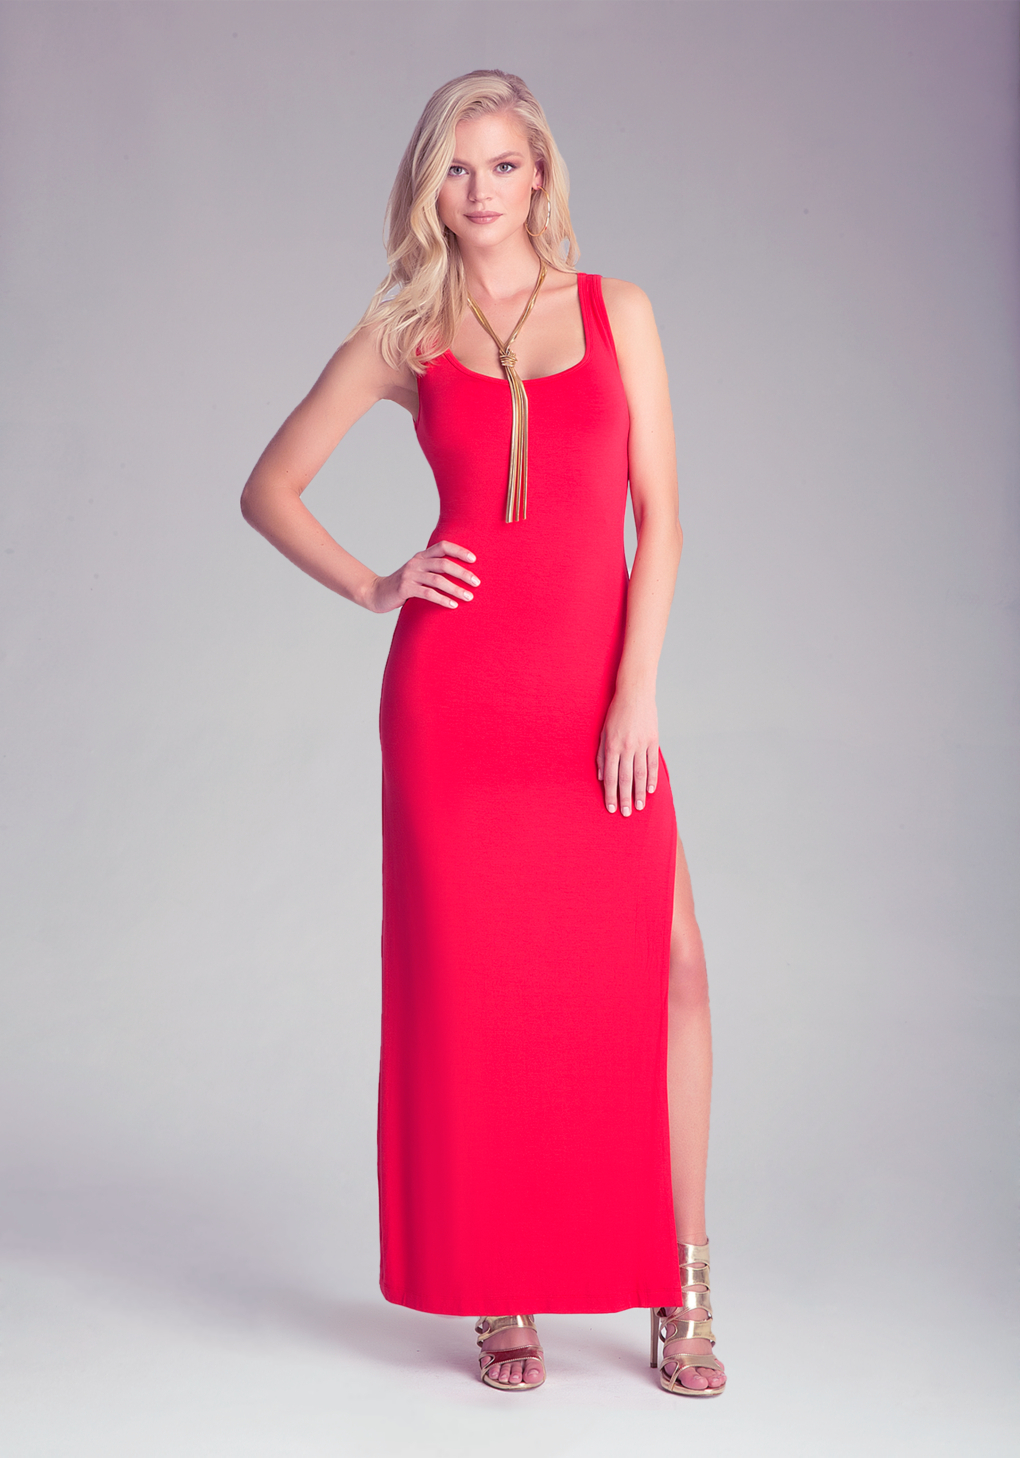 Bebe Red Satin Dress - Make You Look Thinner